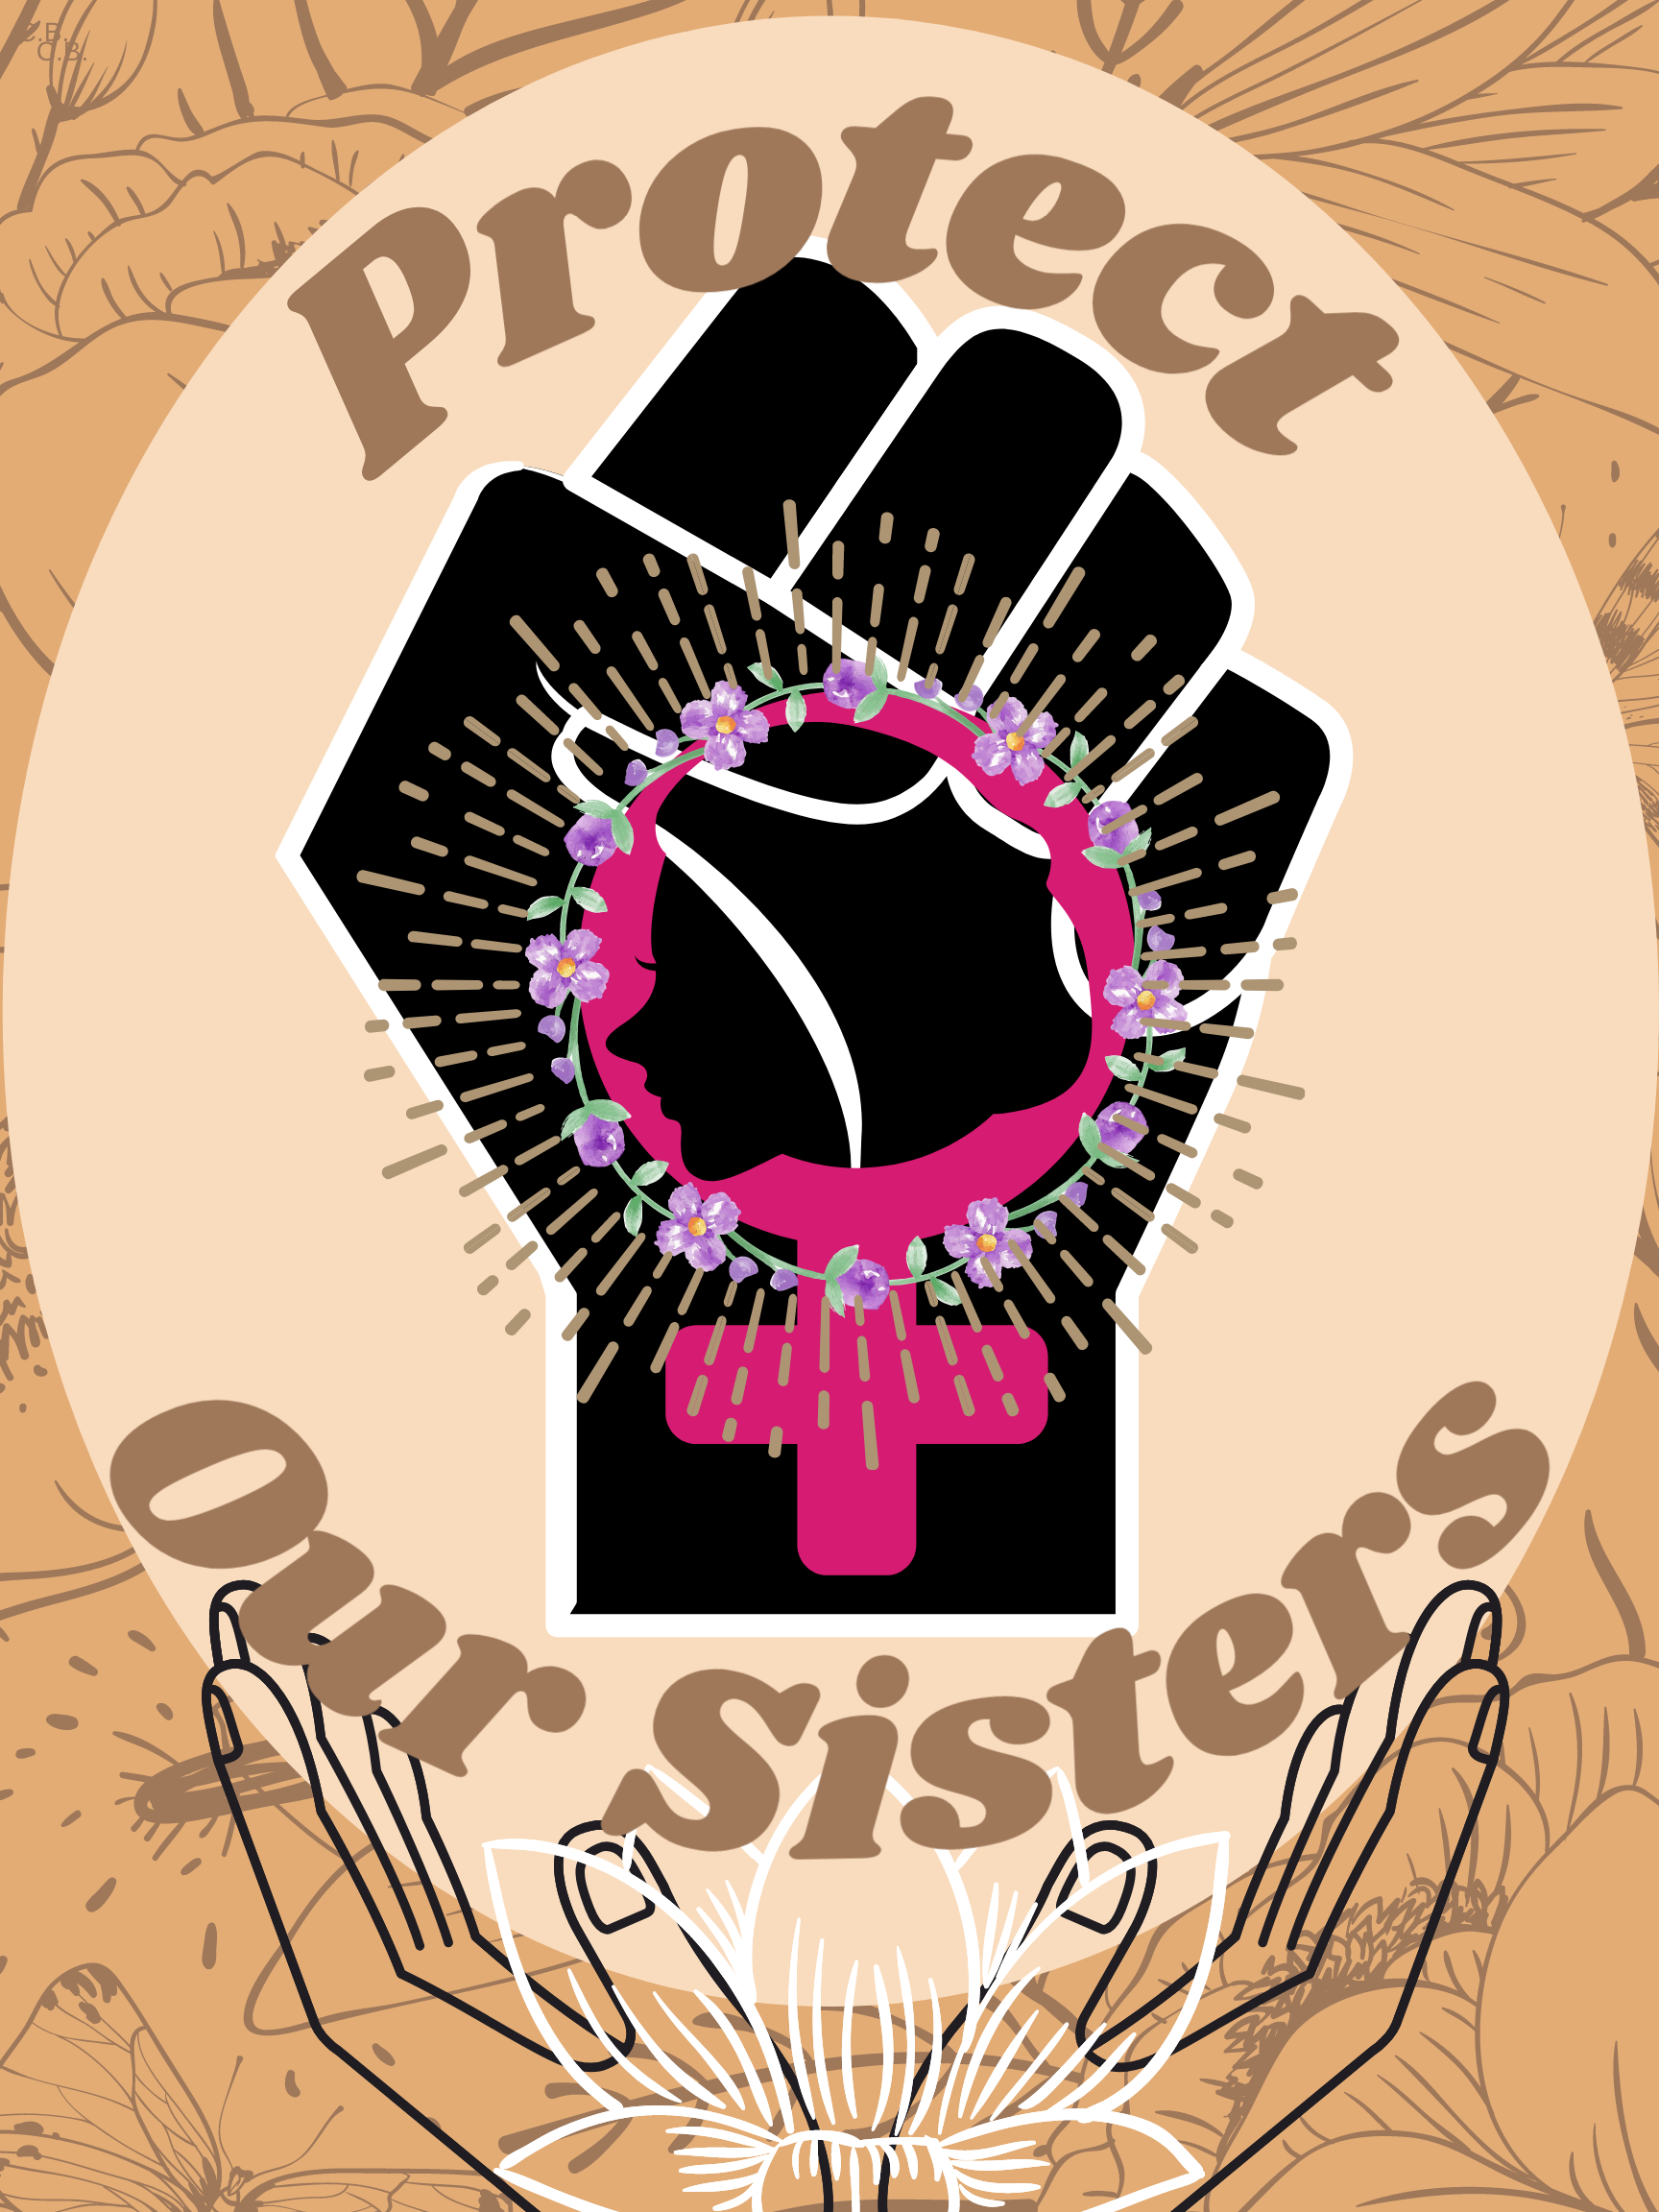 A raised black fist with a female sign and the words "Protect Our Sisters"